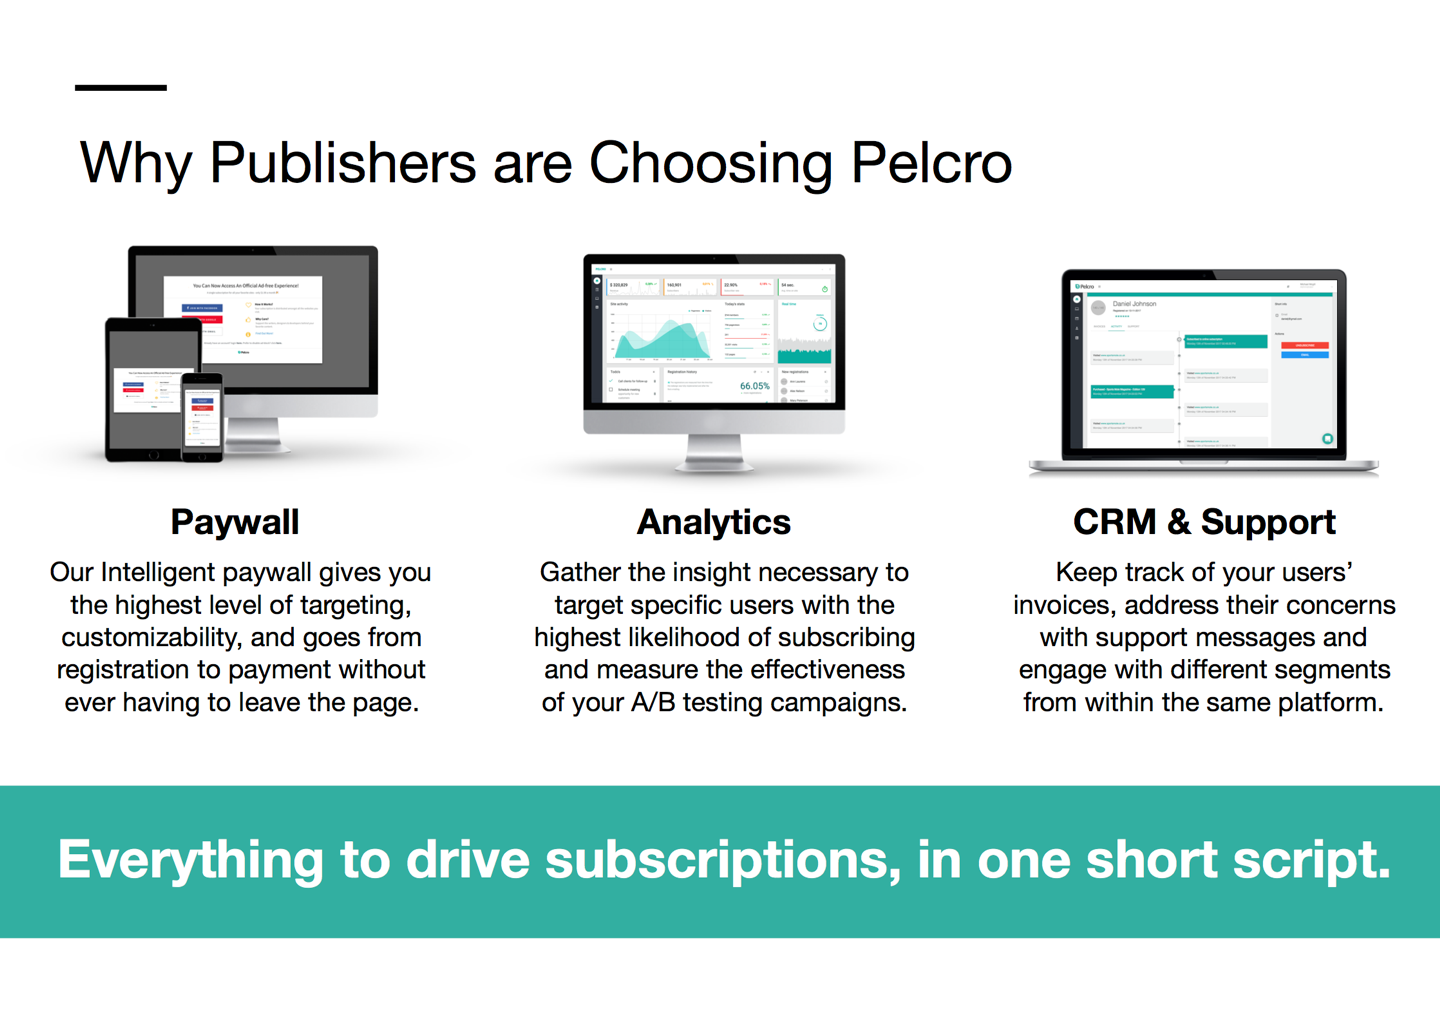 Content Paywall: Start driving subscription revenue